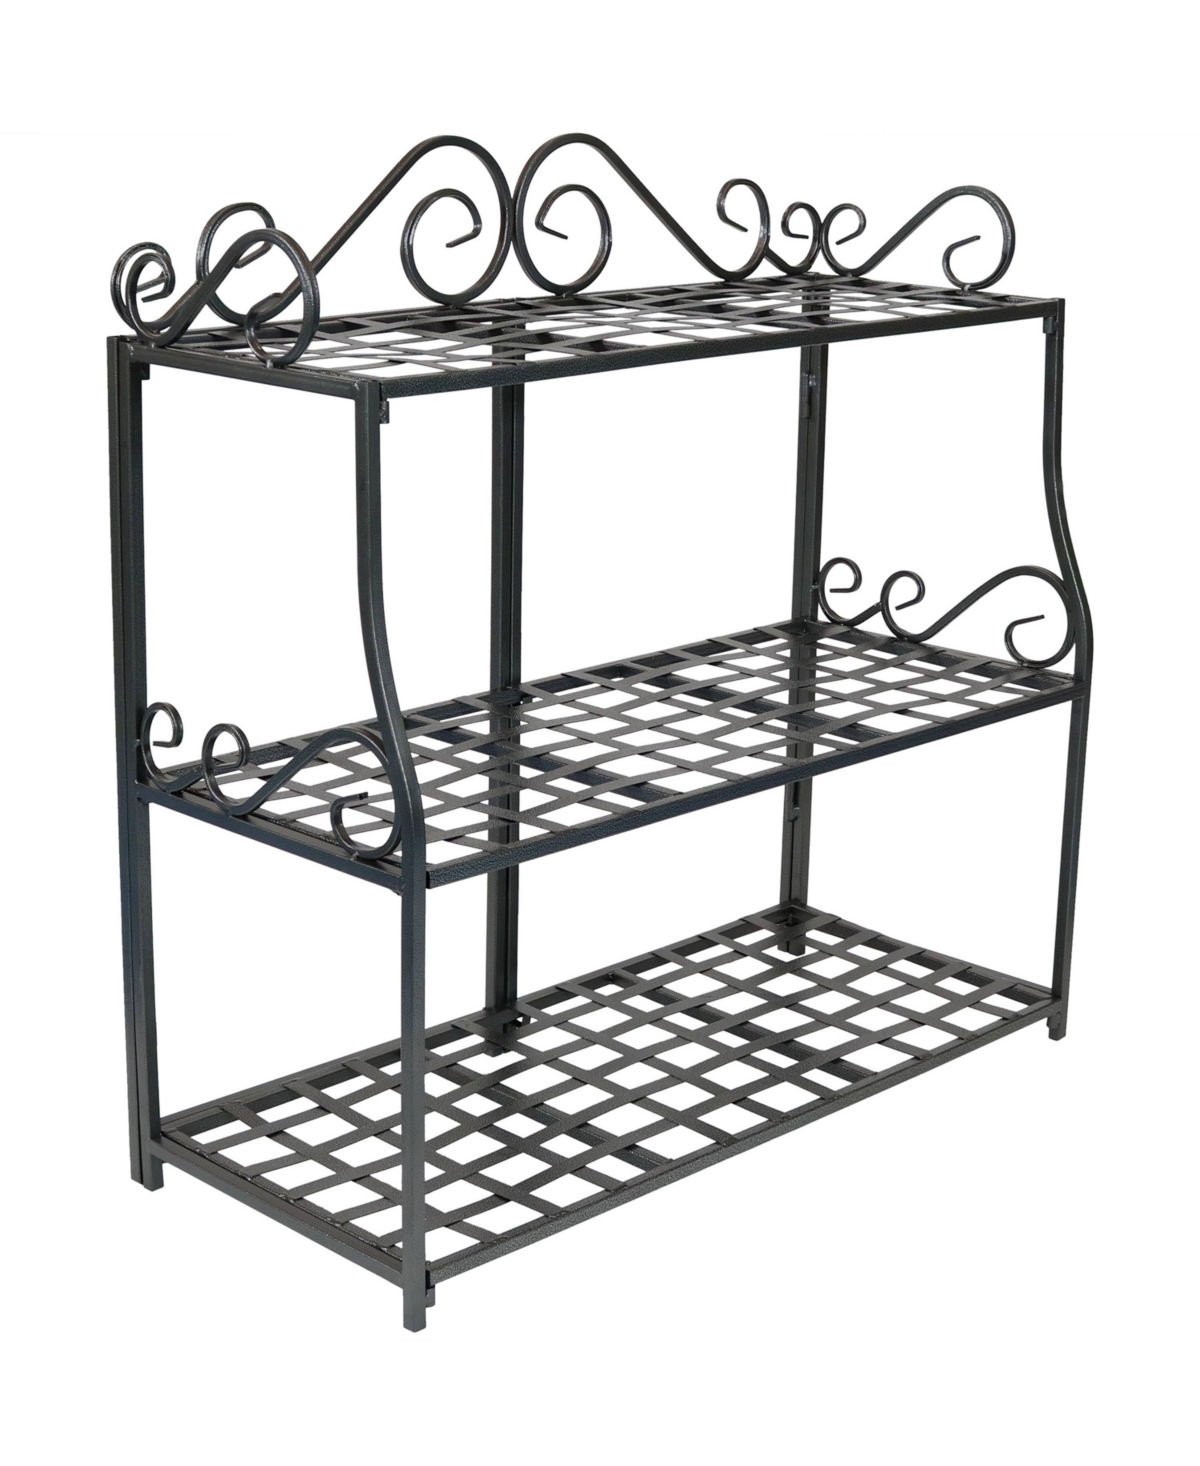 Black Iron 3-Tier Plant Stand Shelf with Scroll Edging - 30 in - Silver